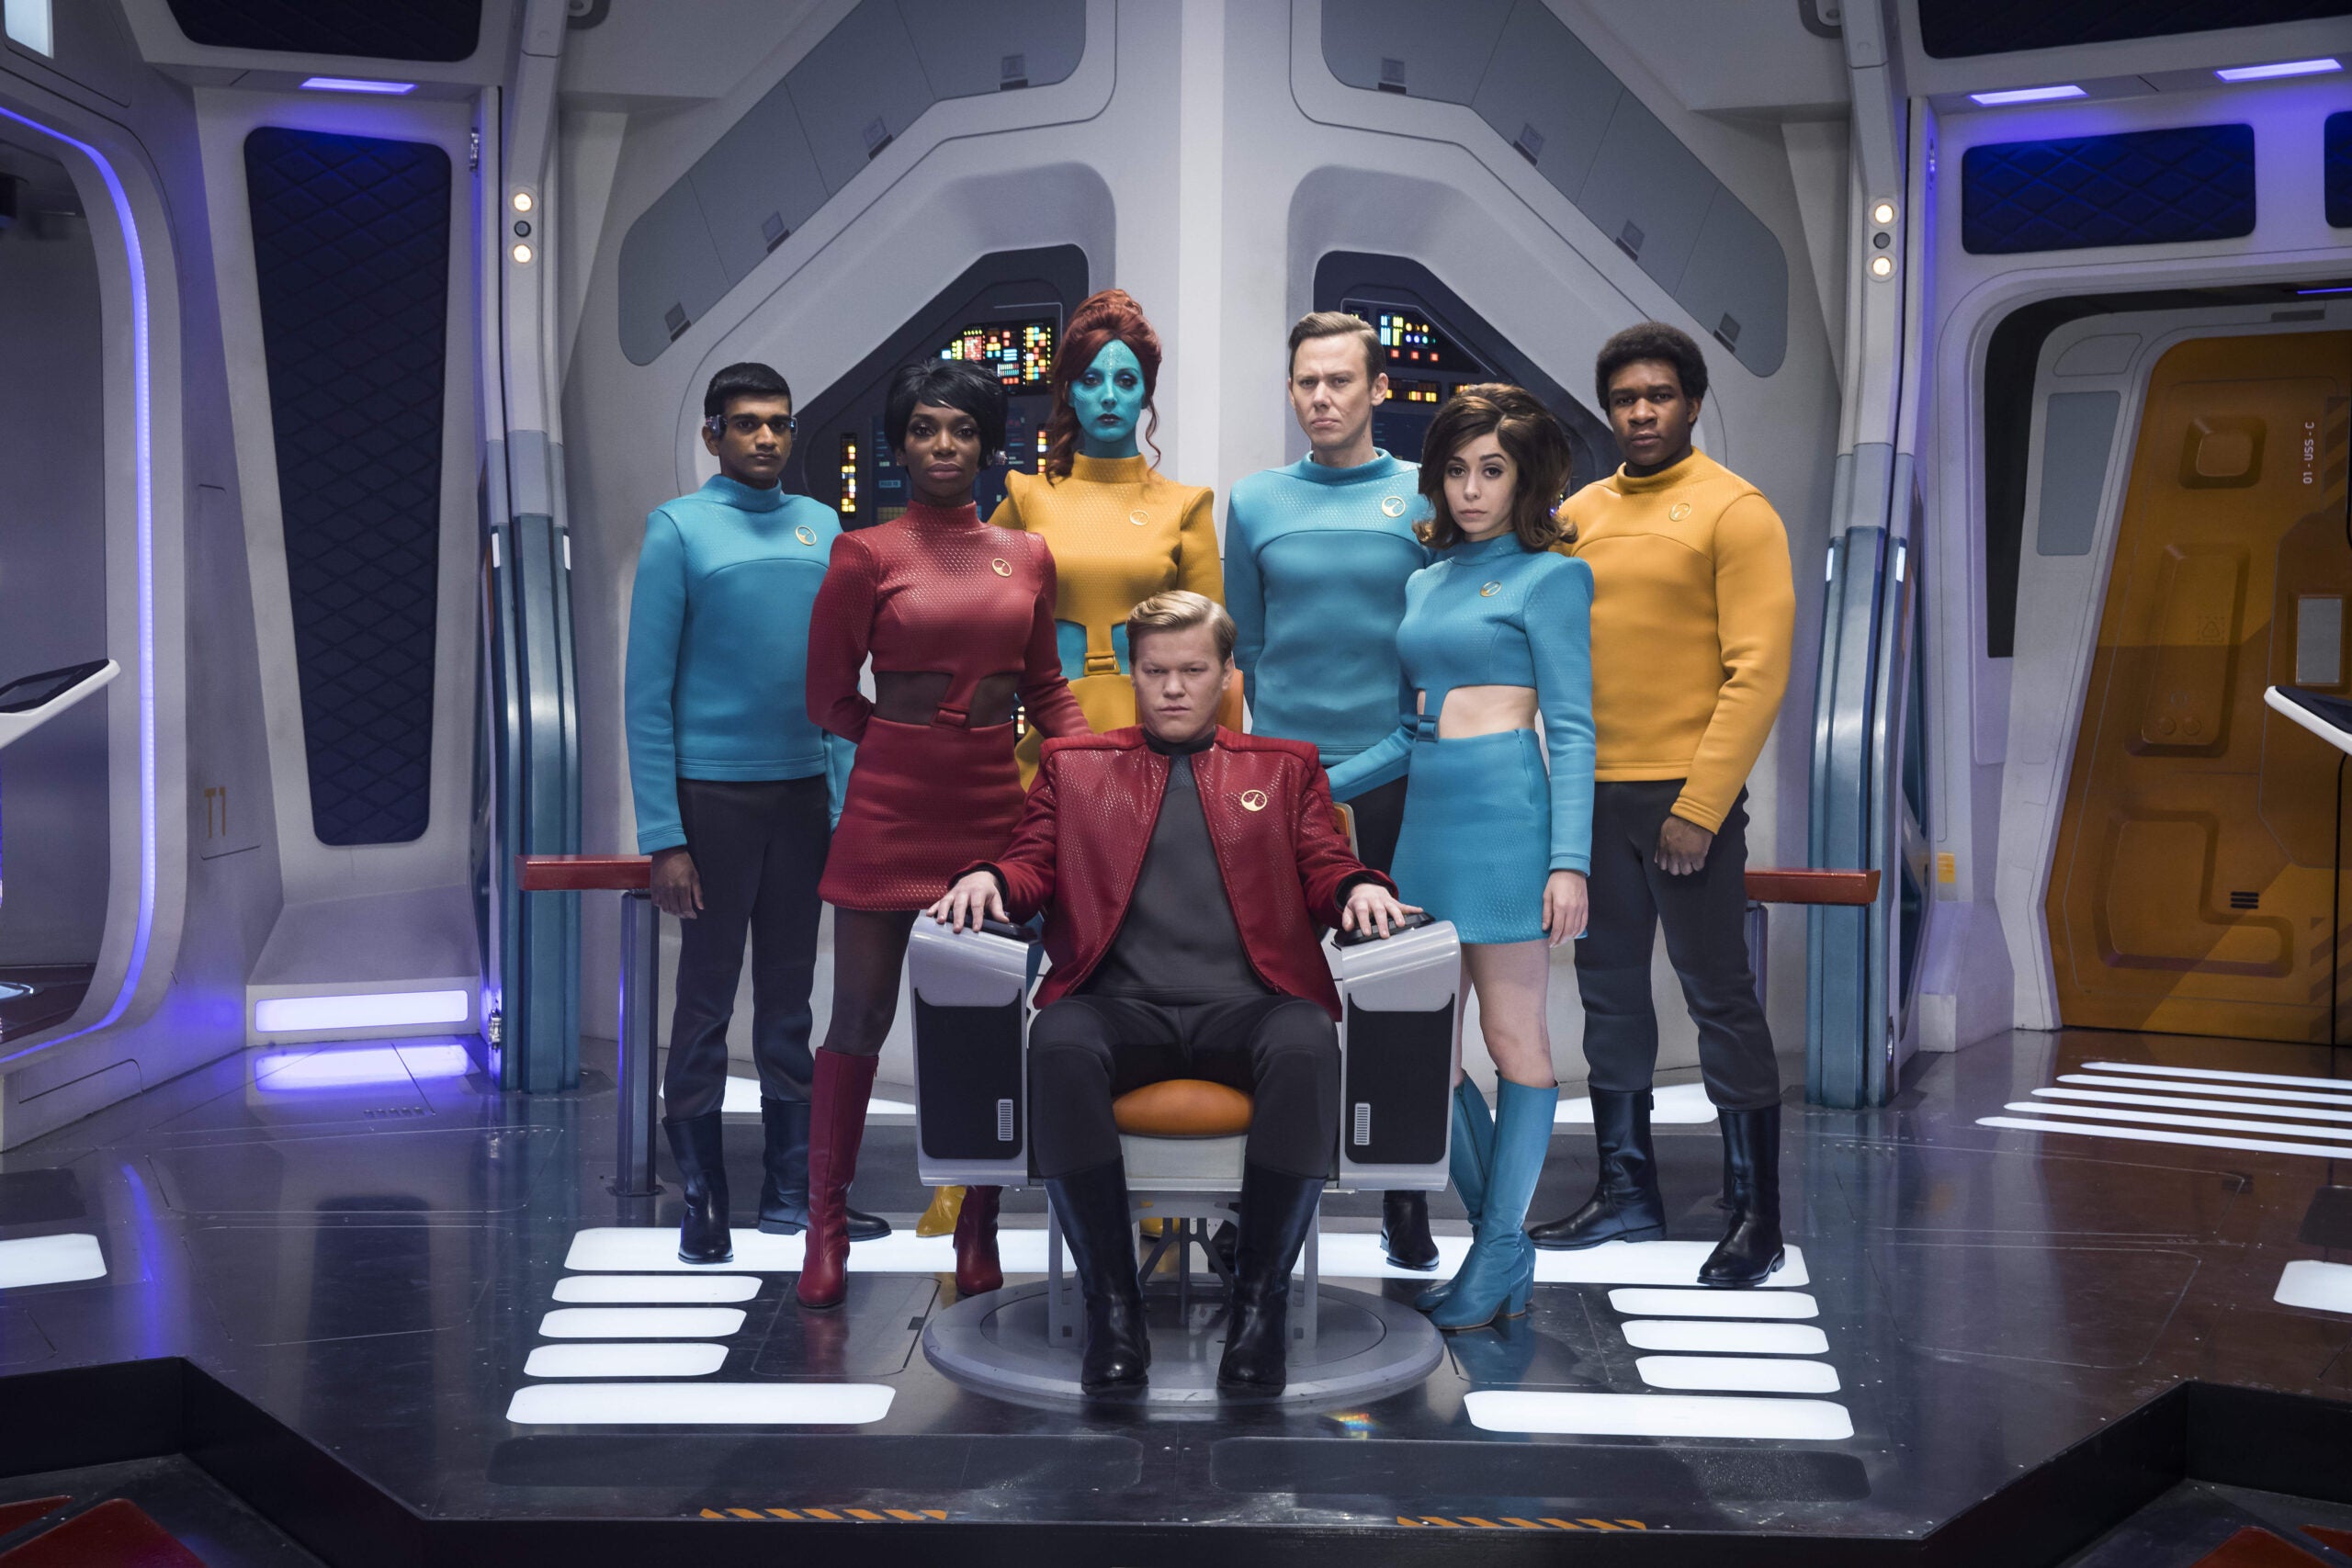 Charlie Brooker: “Everything’s gone a bit Black Mirror – but it’s free publicity for us”